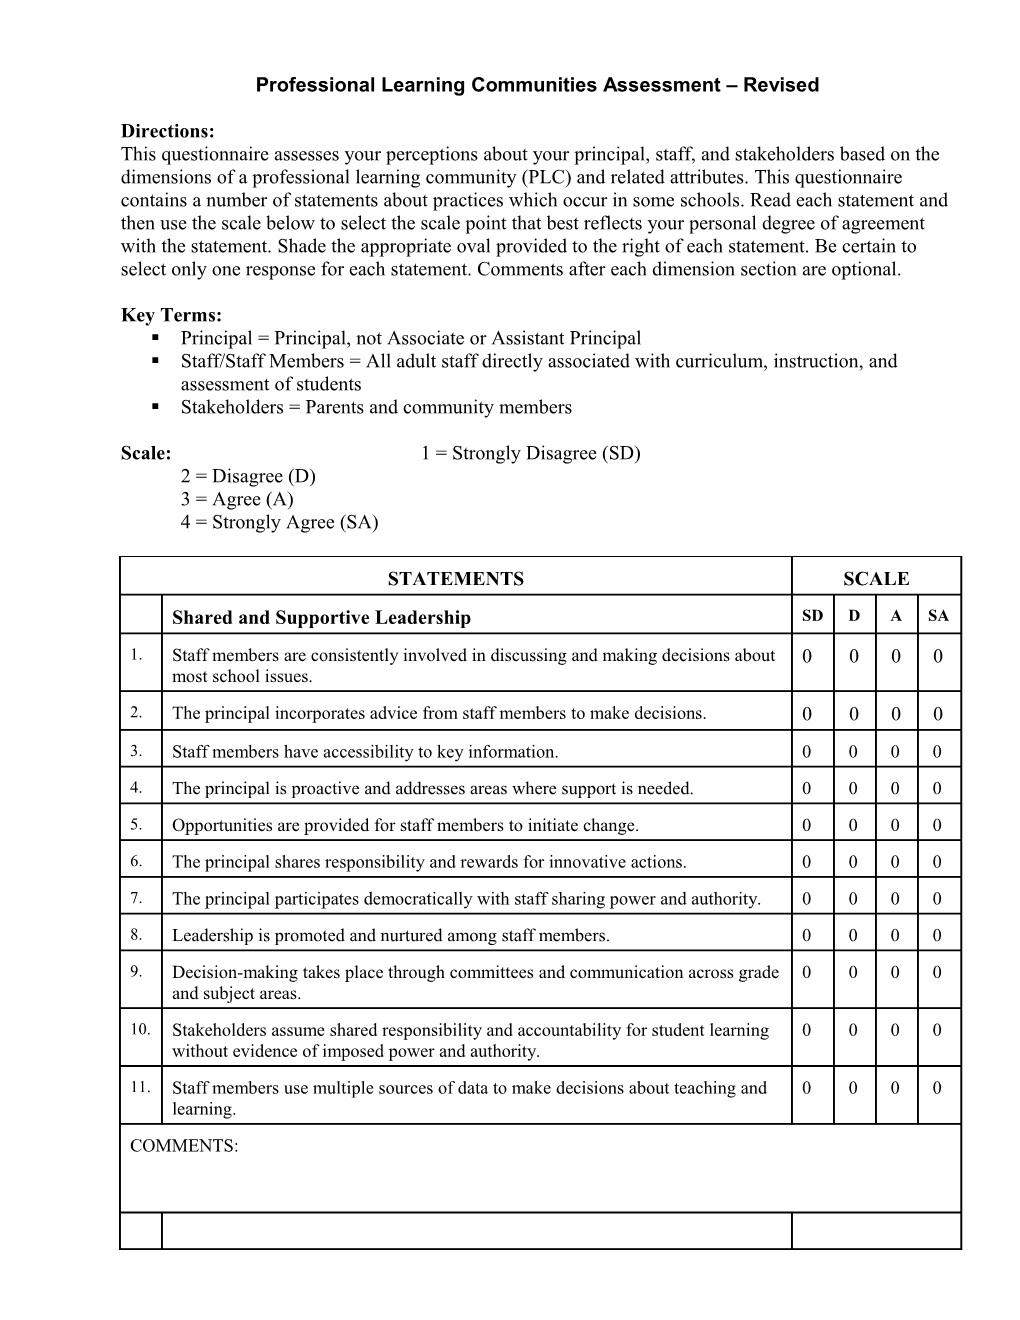 Professional Learning Communities Assessment Revised